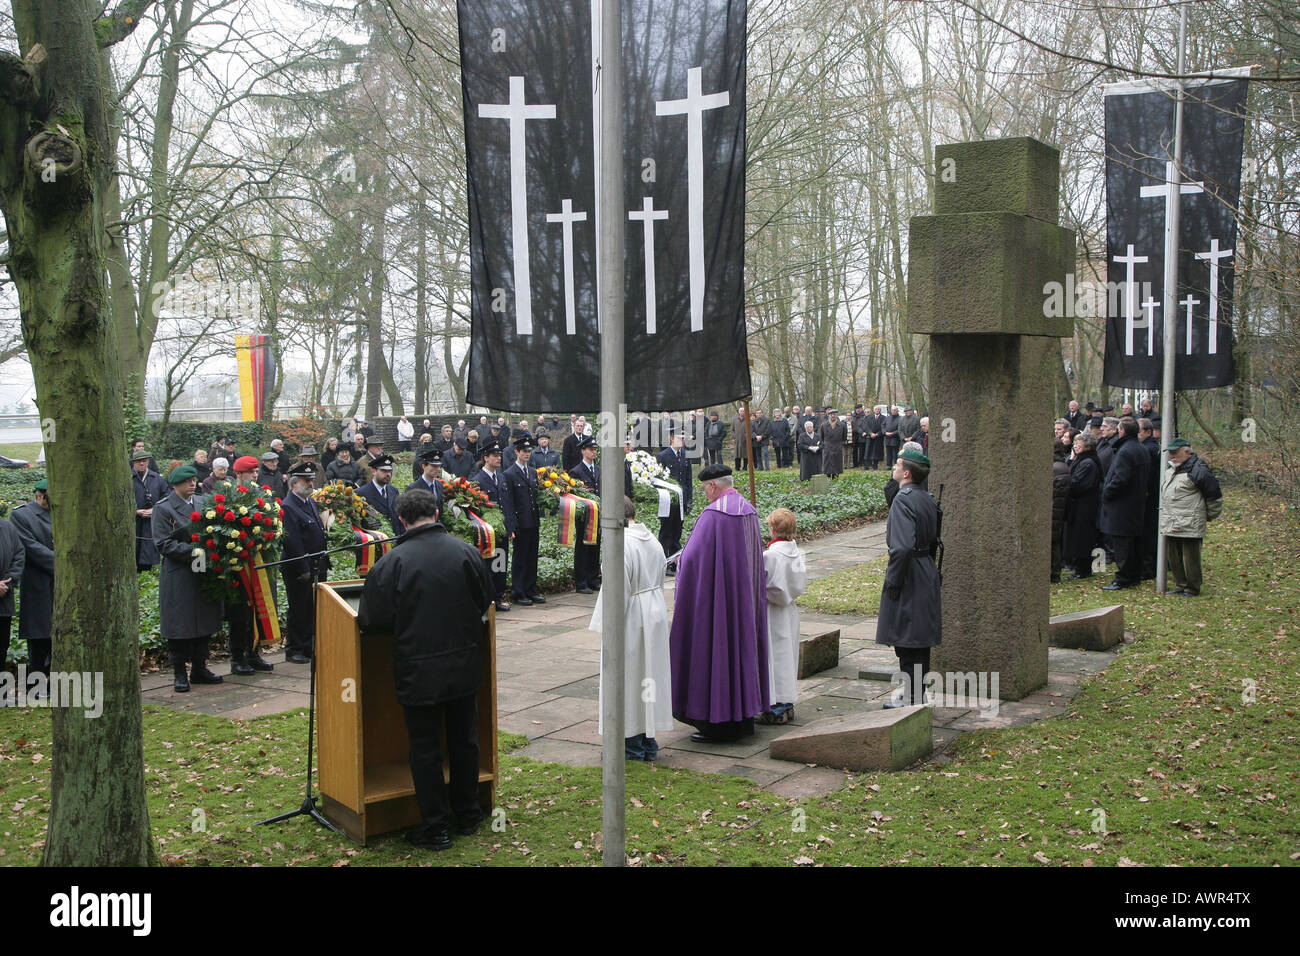 Commemoration at the military memorial on the Remembrance Sunday in Pfaffenheck, Rhineland-Palatinate, Germany Stock Photo